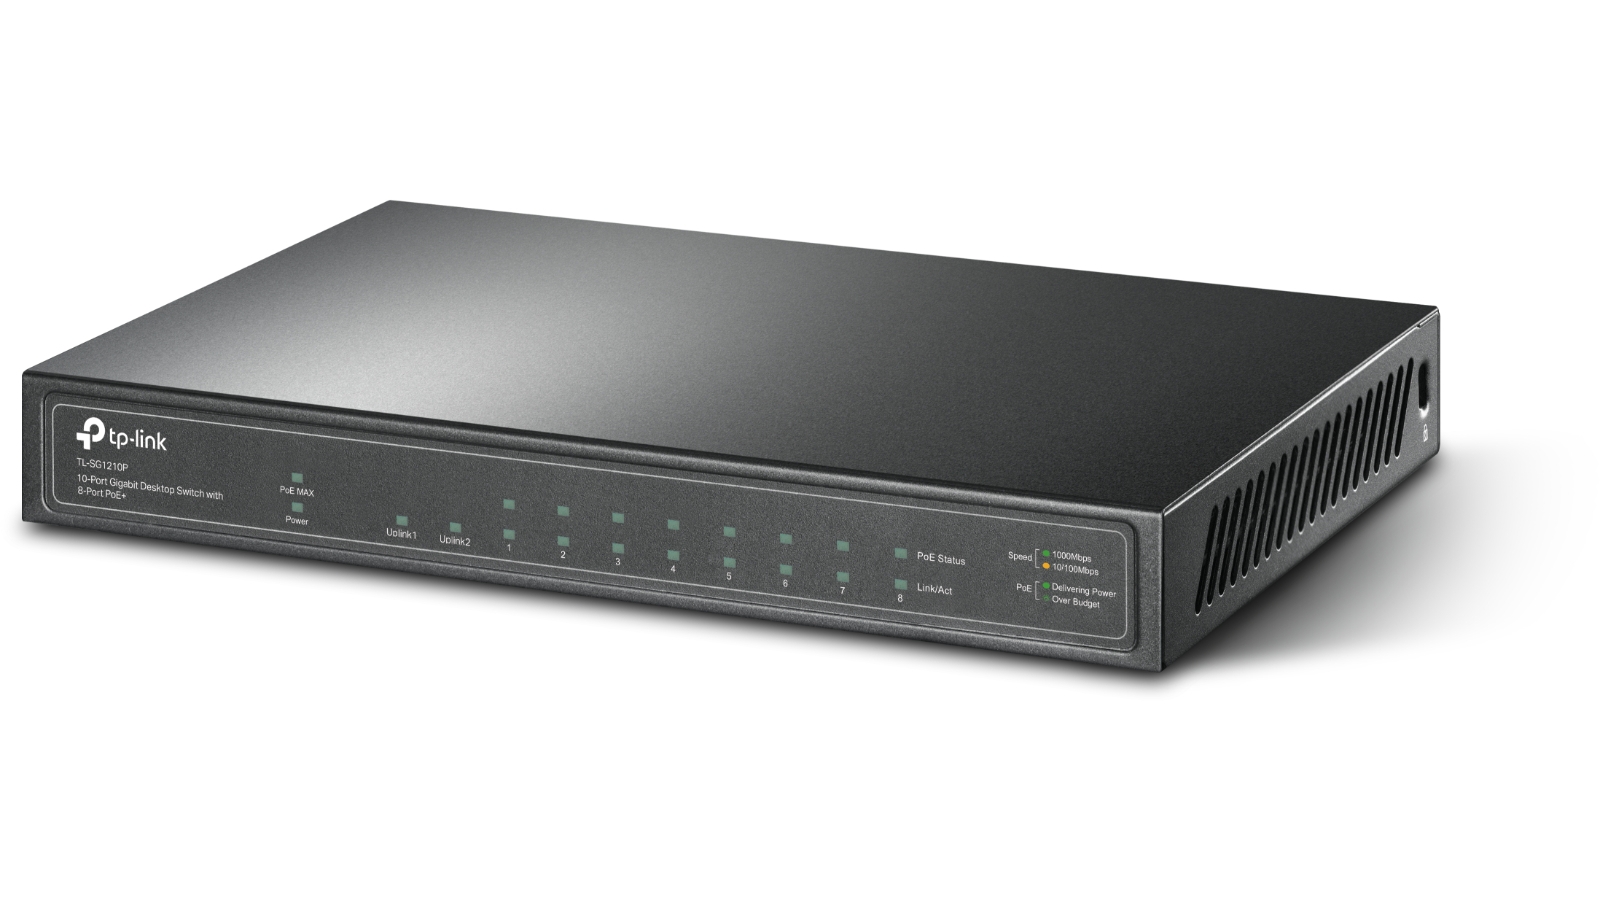 Buy TP-Link 10-ports 1210 managed PoE smart switch?